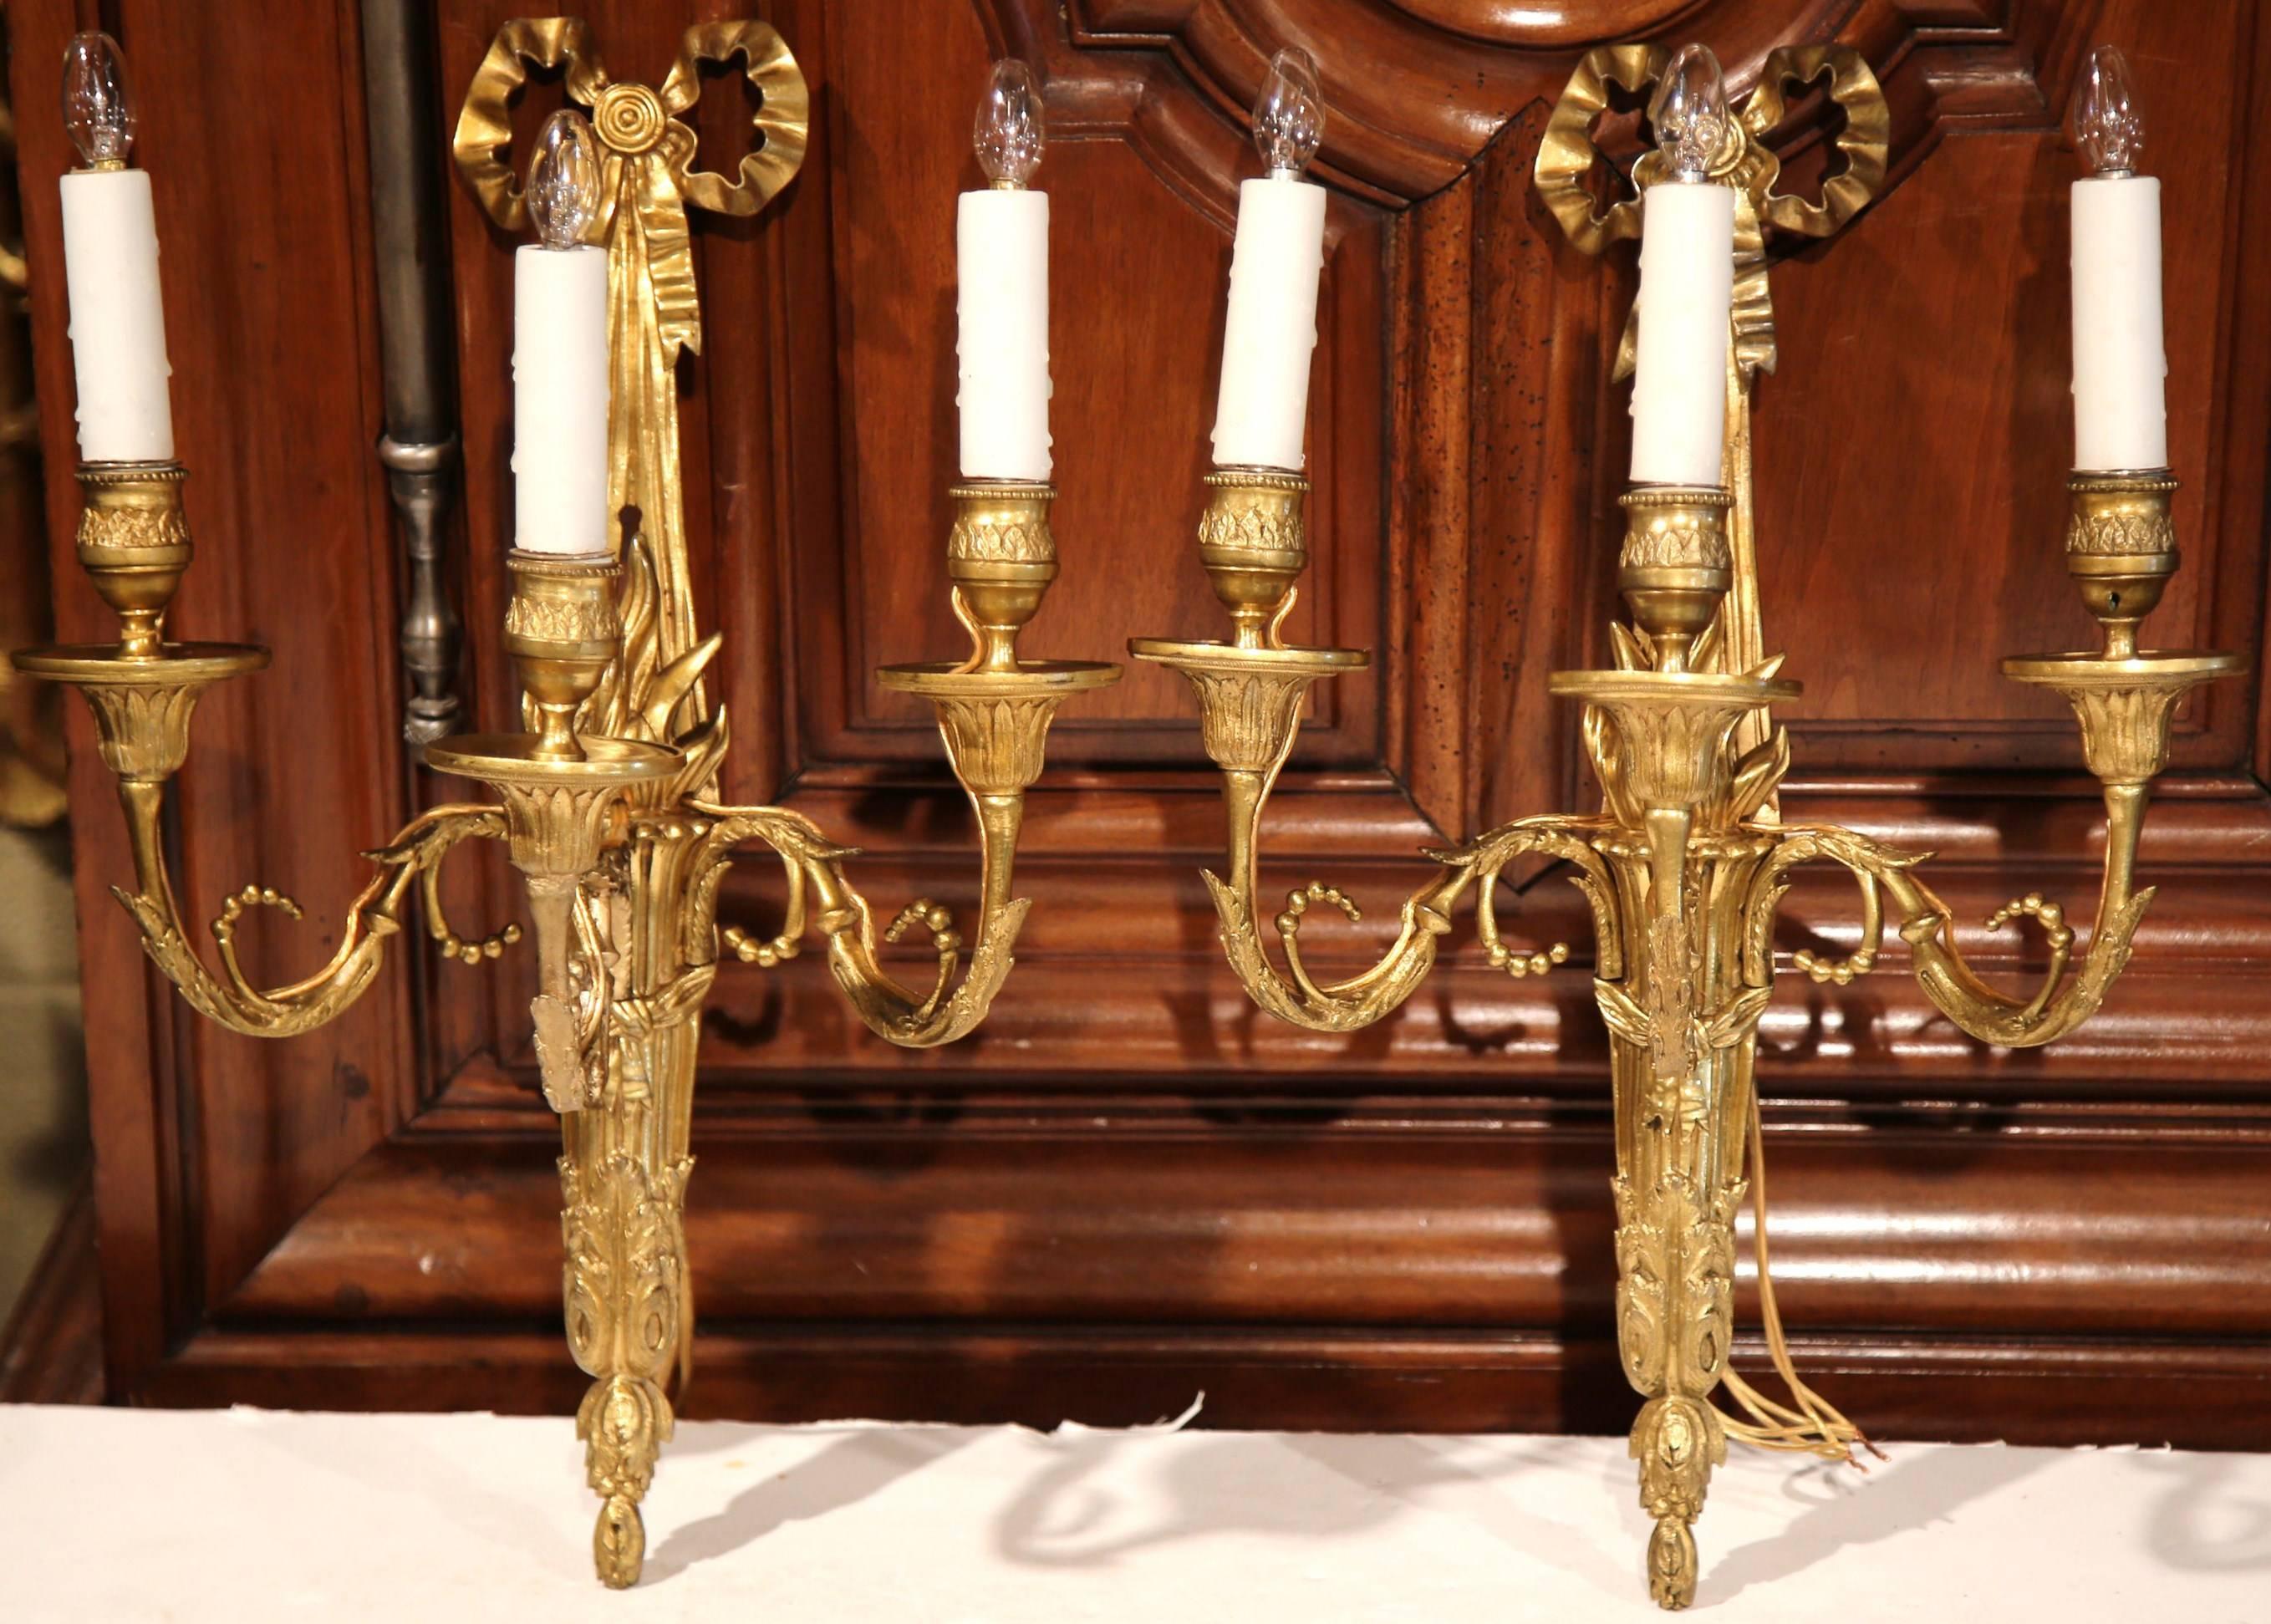 This elegant pair of antique bronze sconces was created in Versailles, France, circa 1870. The light fixtures each have three arms, intricate bronze work and decorated with a traditional Louis XVI stylized bow ribbon at the top. The wall lighting is